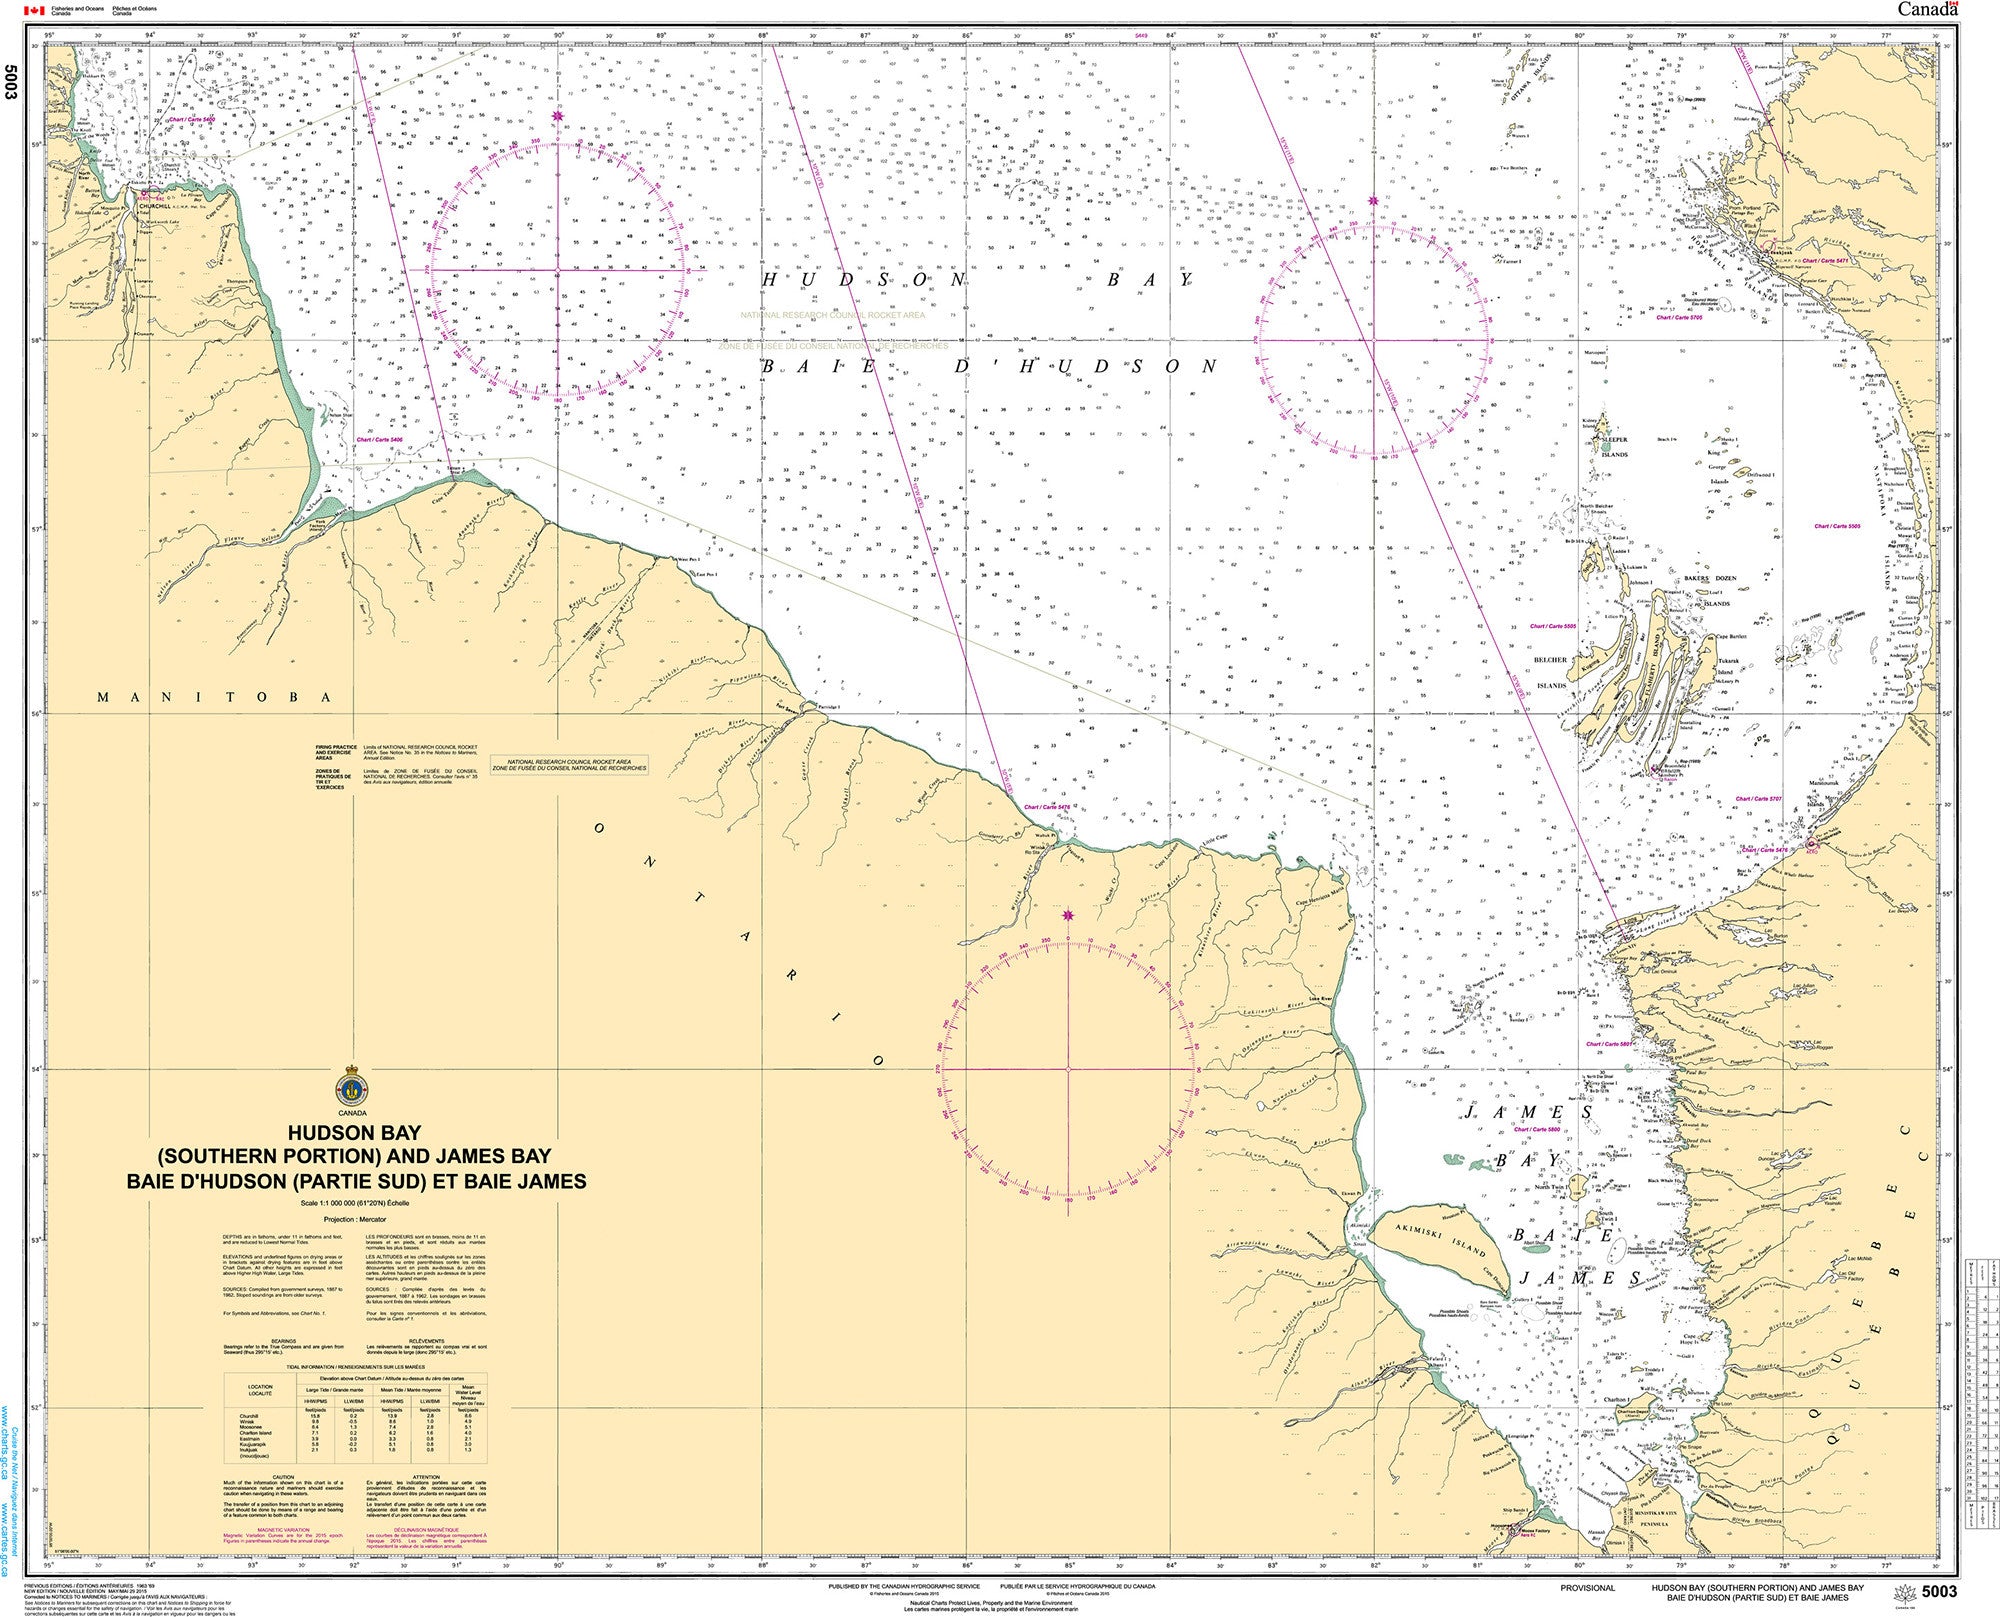 Canadian Hydrographic Service Nautical Chart CHS5003: Hudson Bay (Southern Portion) and James Bay